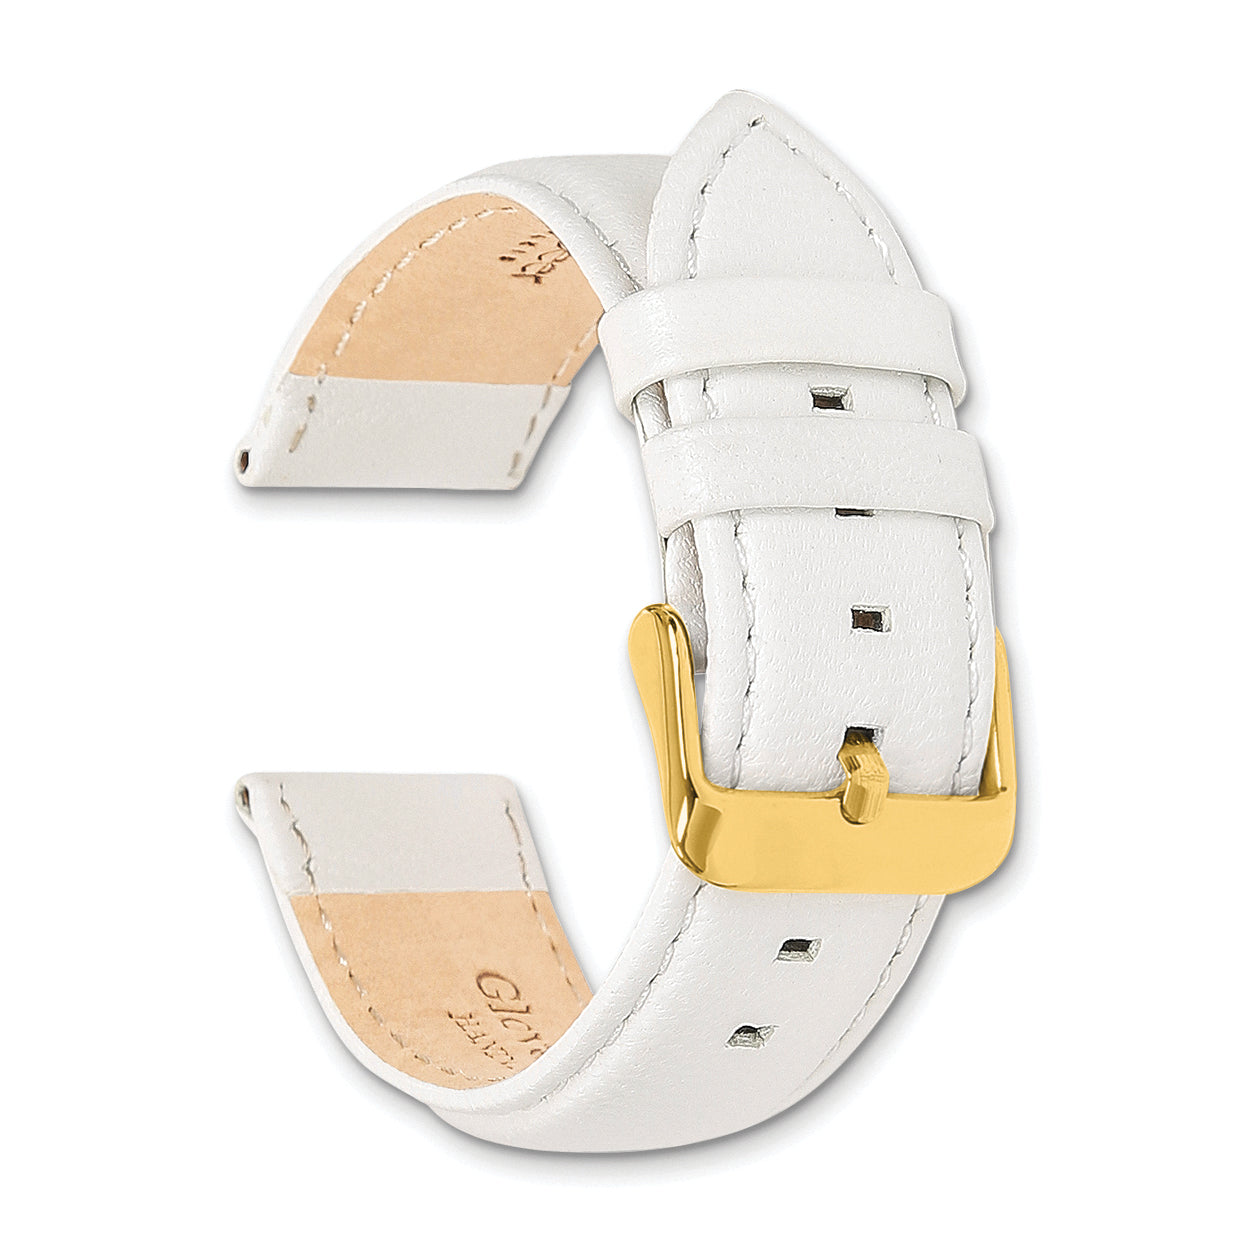 14mm White Glove Leather with Gold-tone Panerai Style Buckle 6.75 inch Watch Band